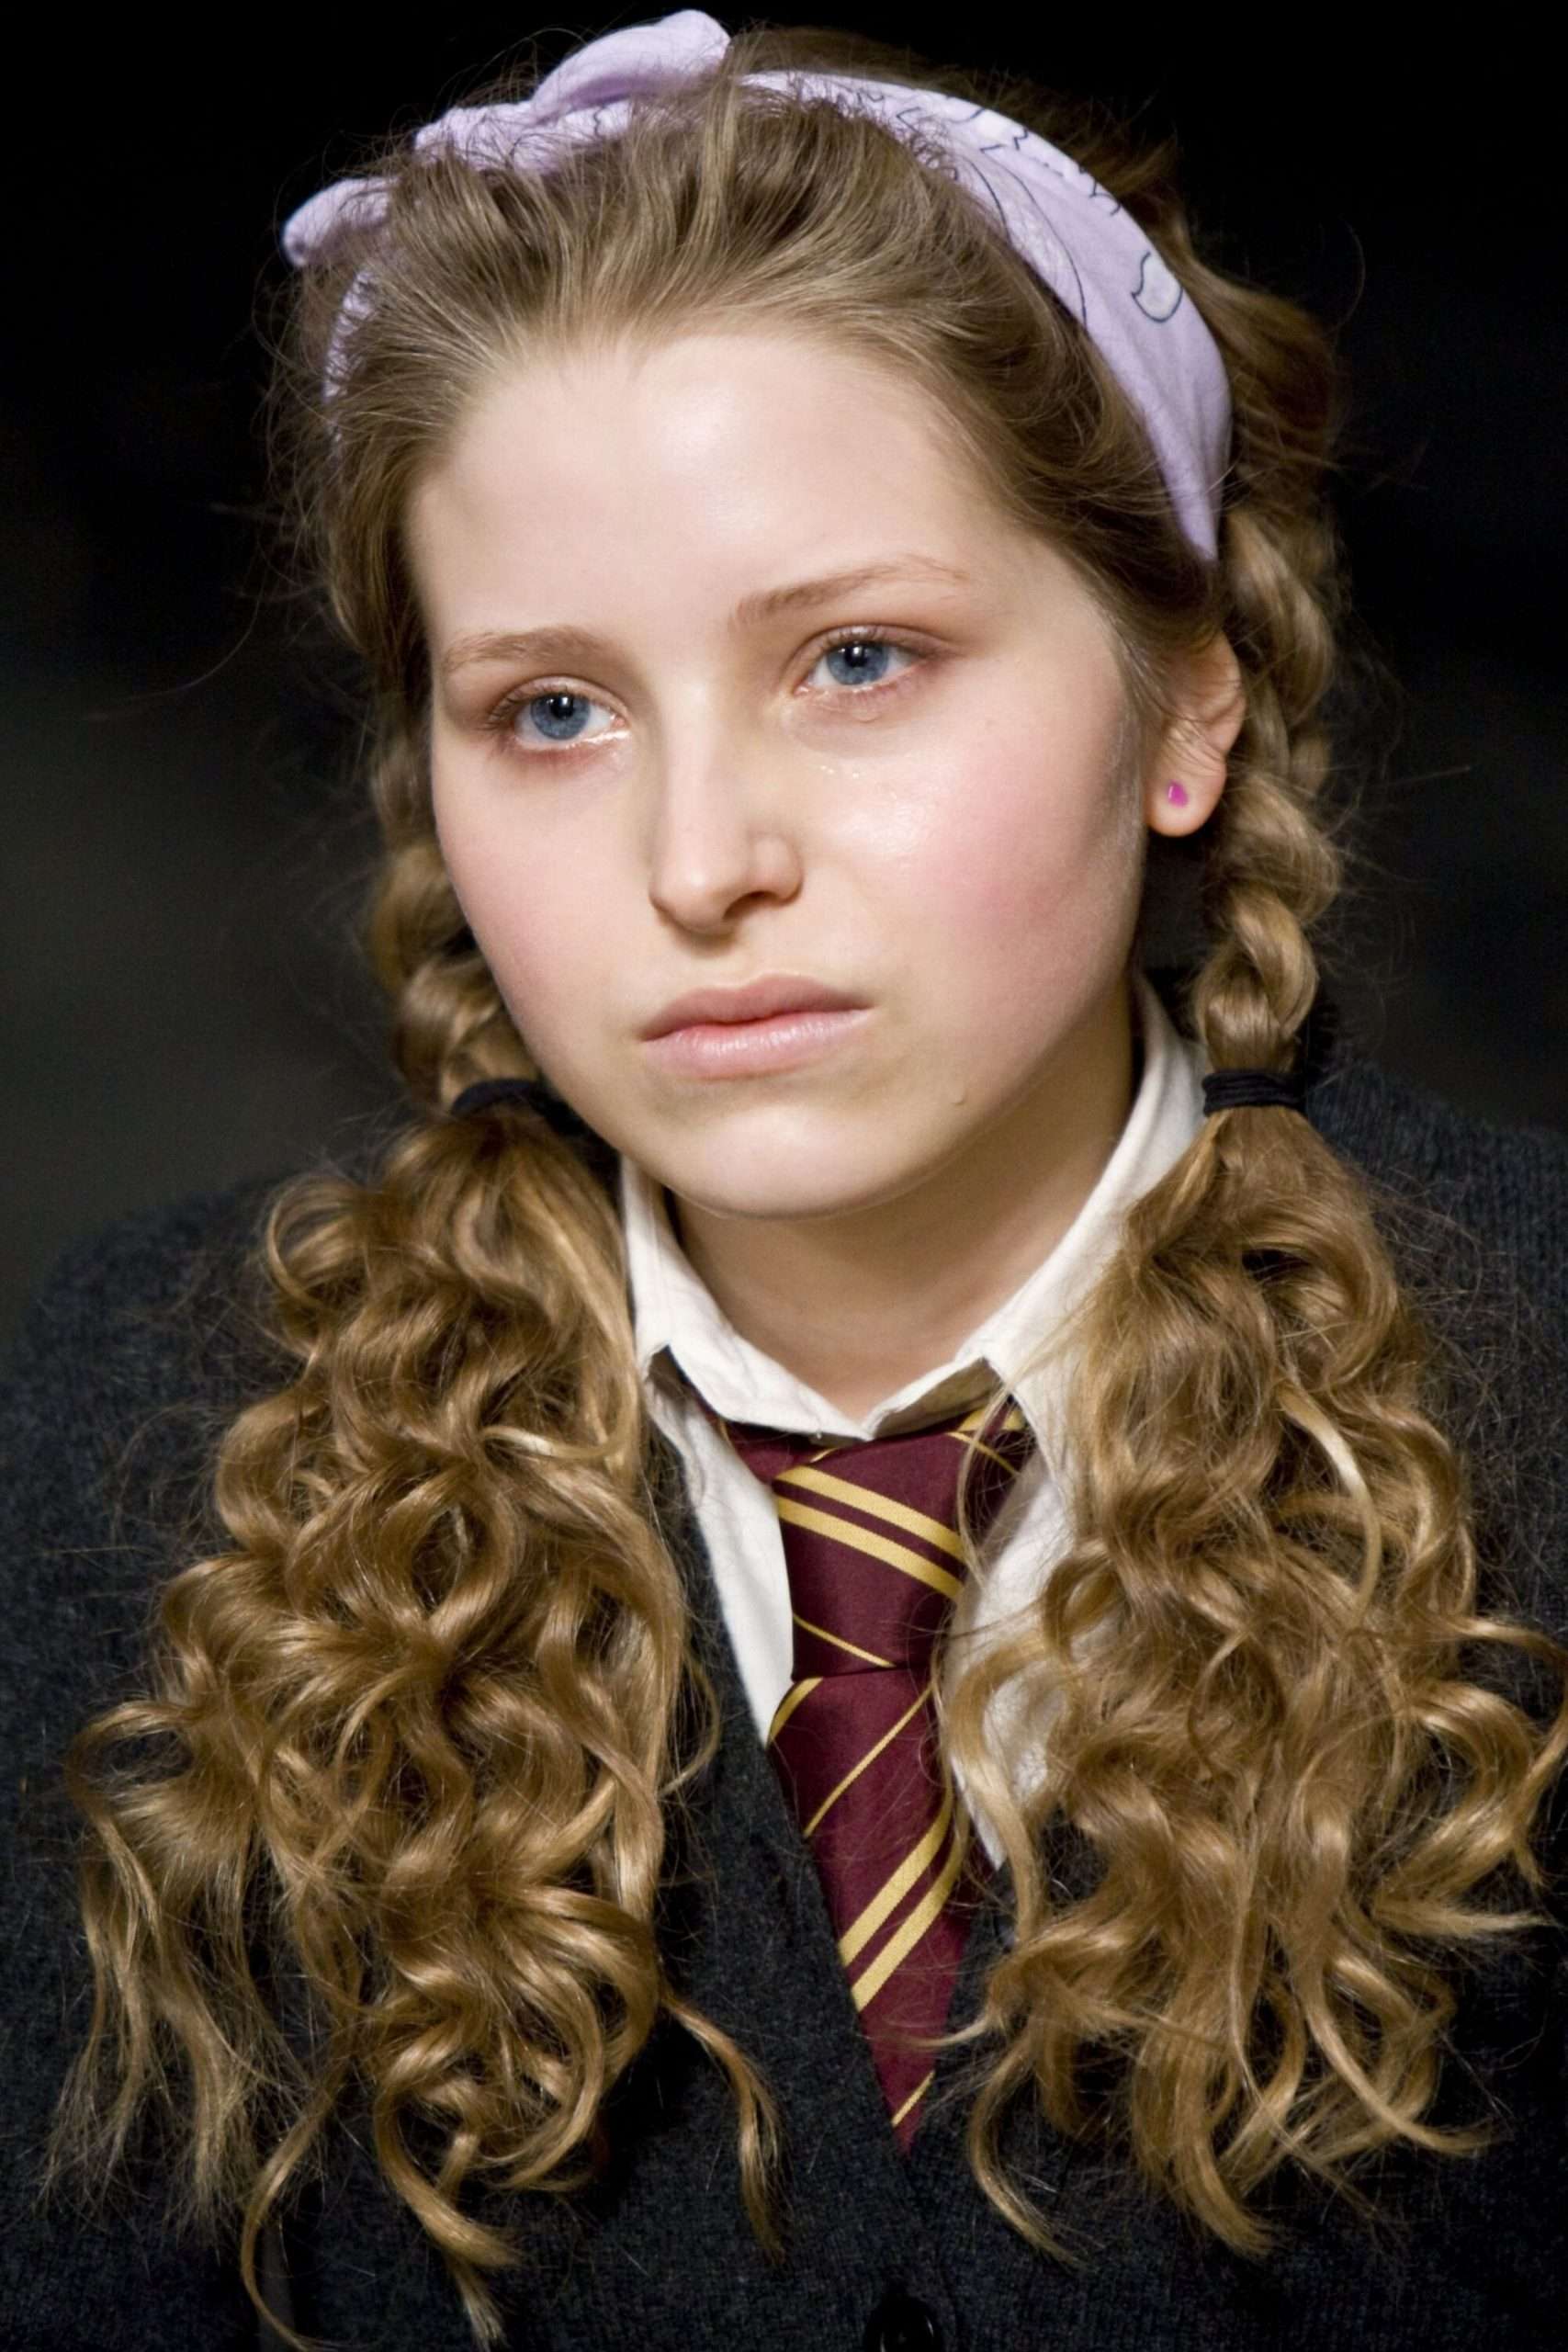 TIL In the Harry Potter movies, Lavender Brown was ...